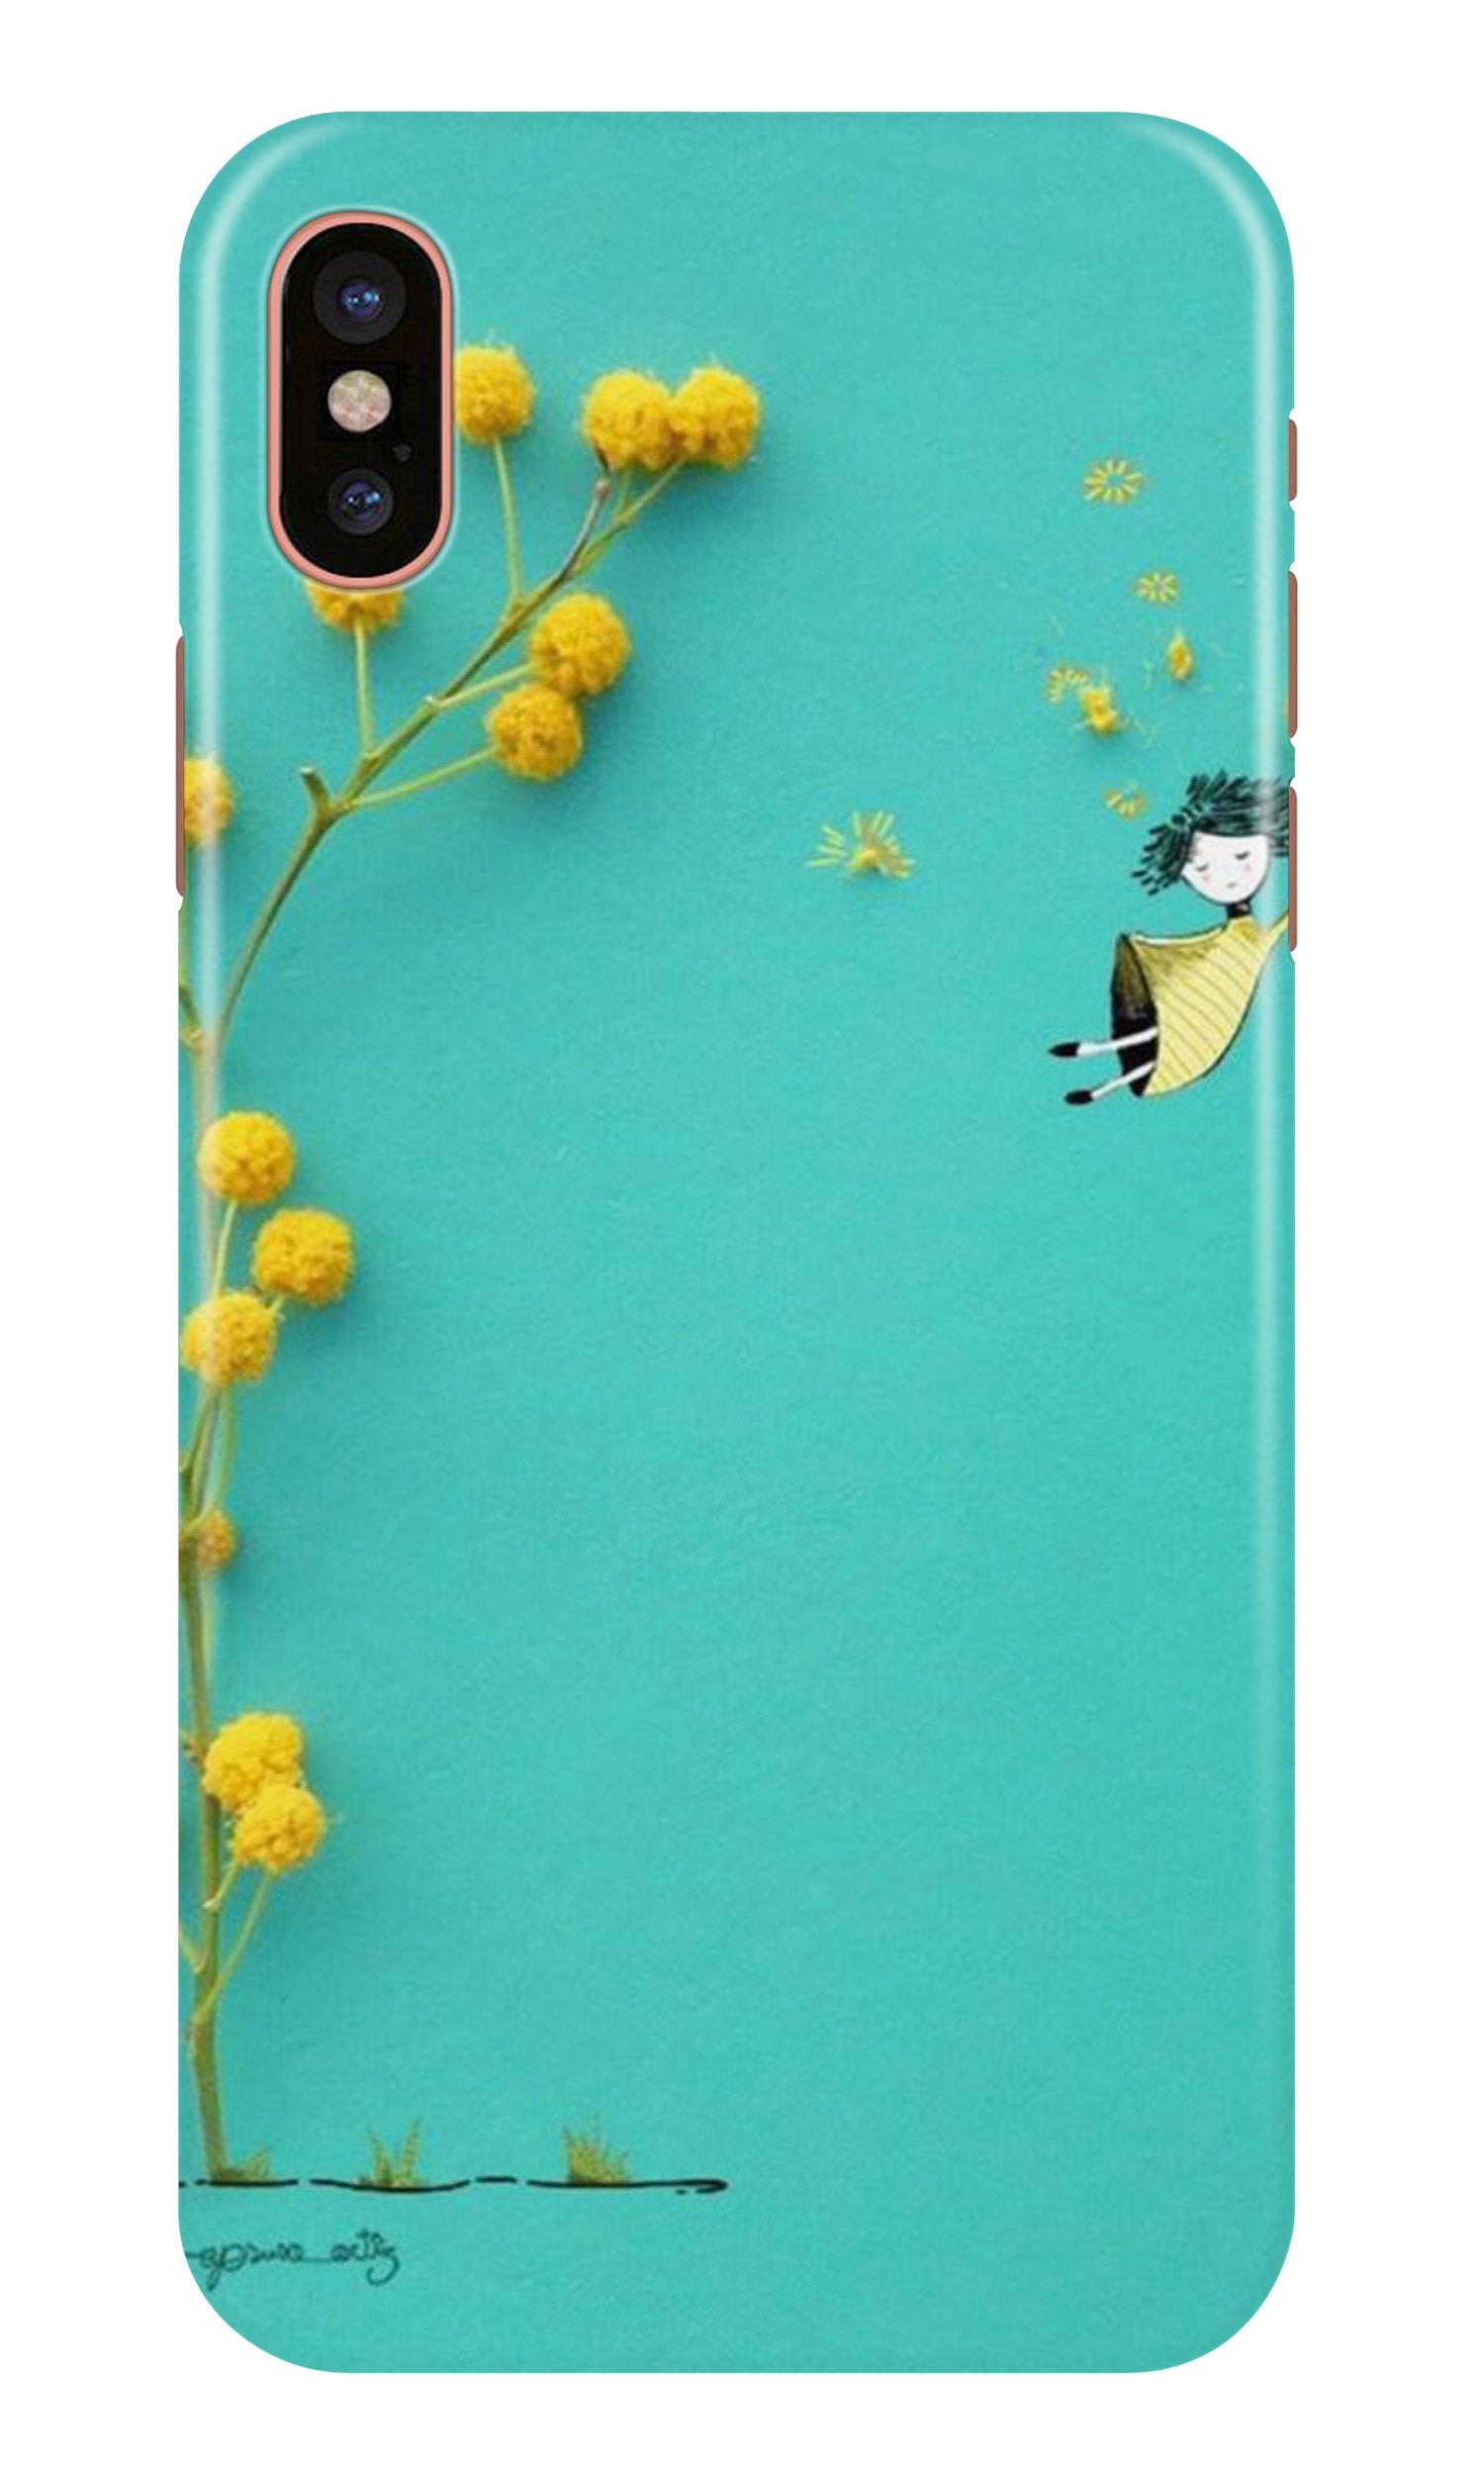 Flowers Girl Case for iPhone X (Design No. 216)